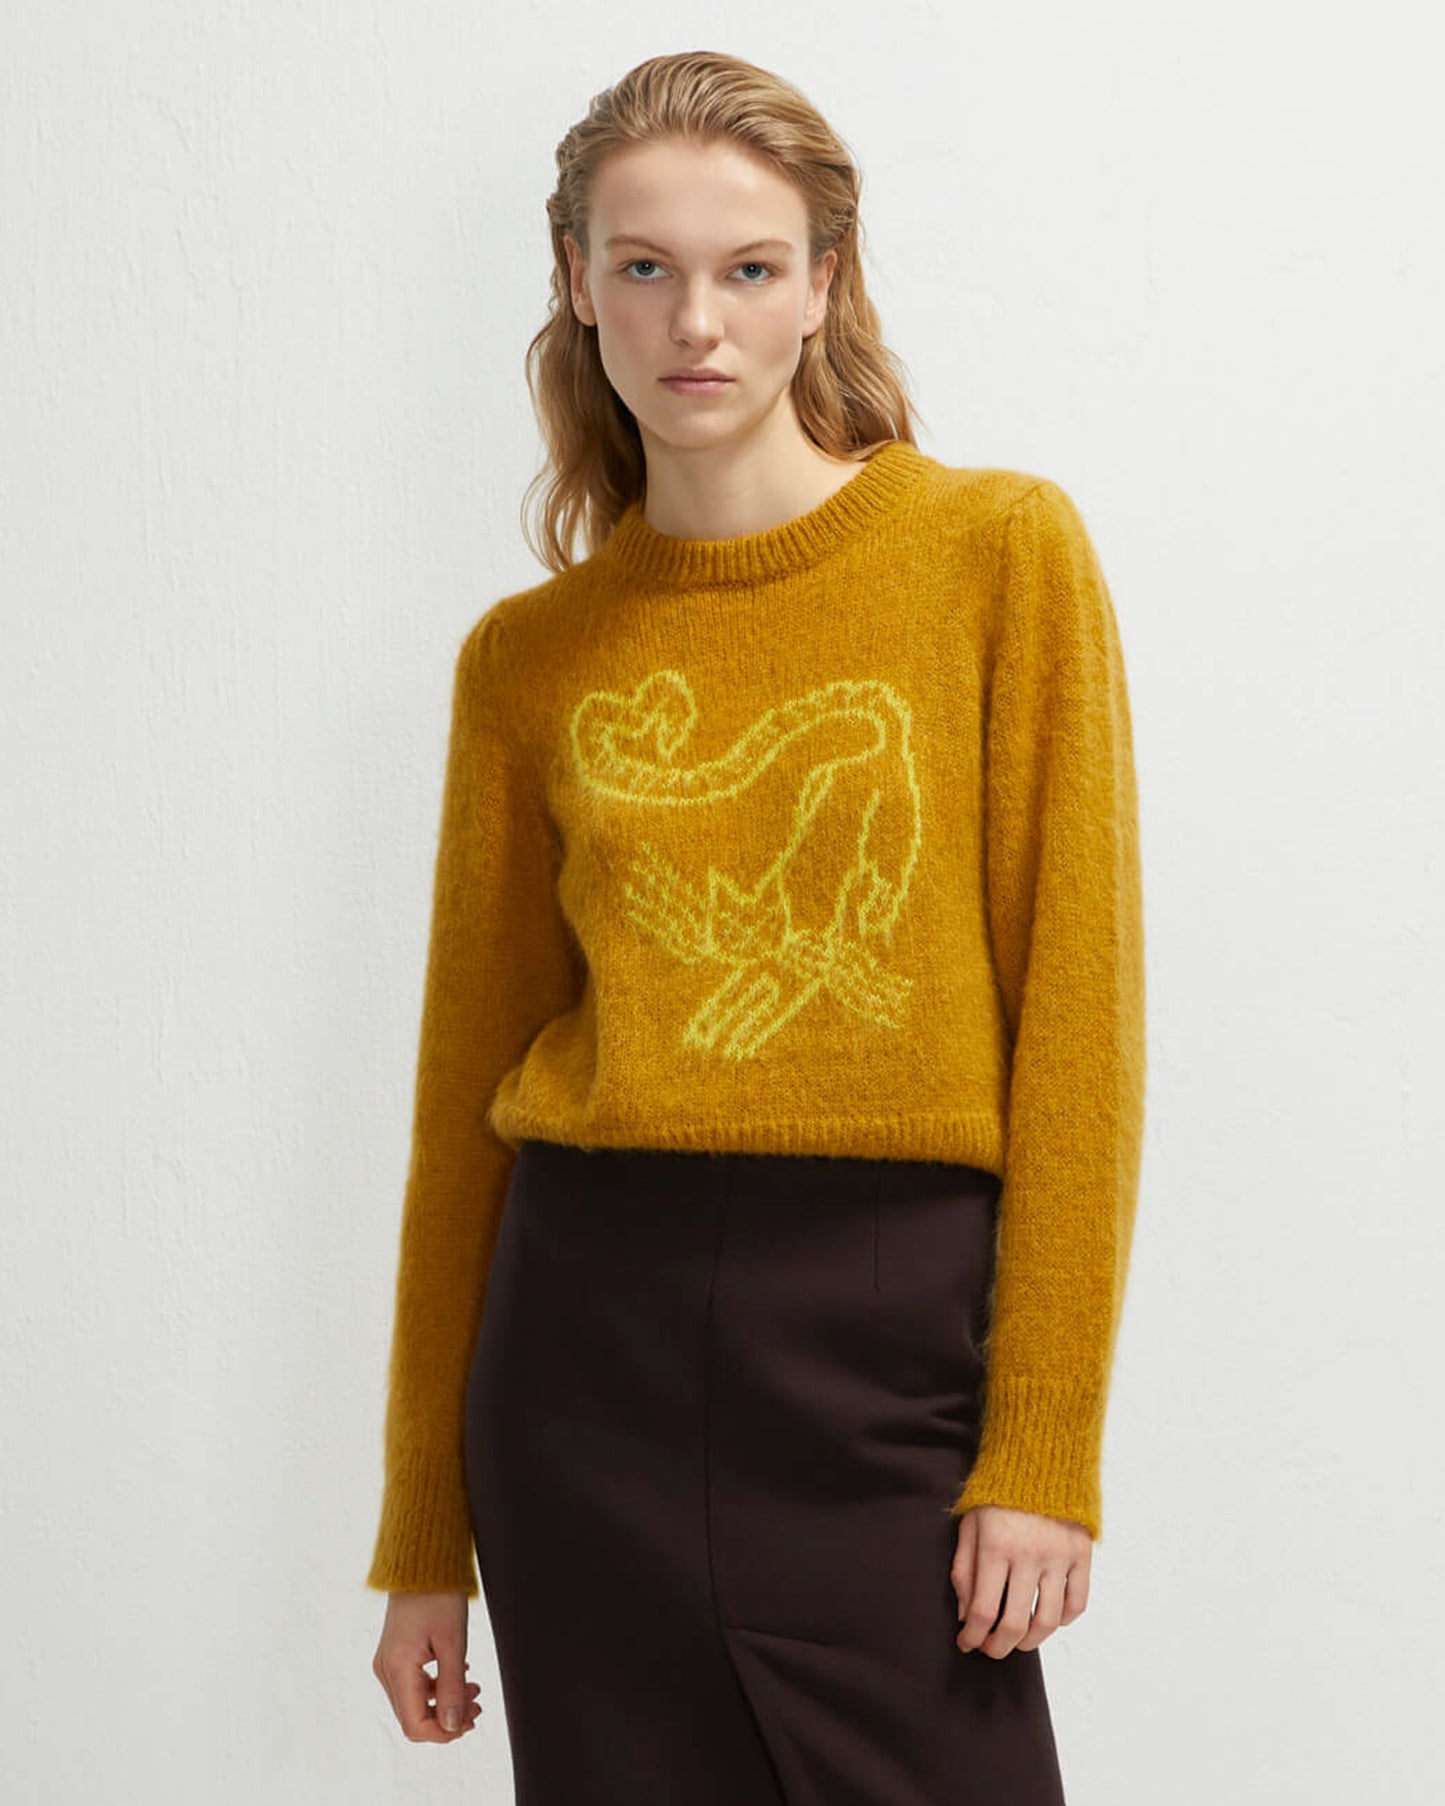 BEATRICE.B Cat Crewneck Sweater in Chartreuse available at Lahn.shop